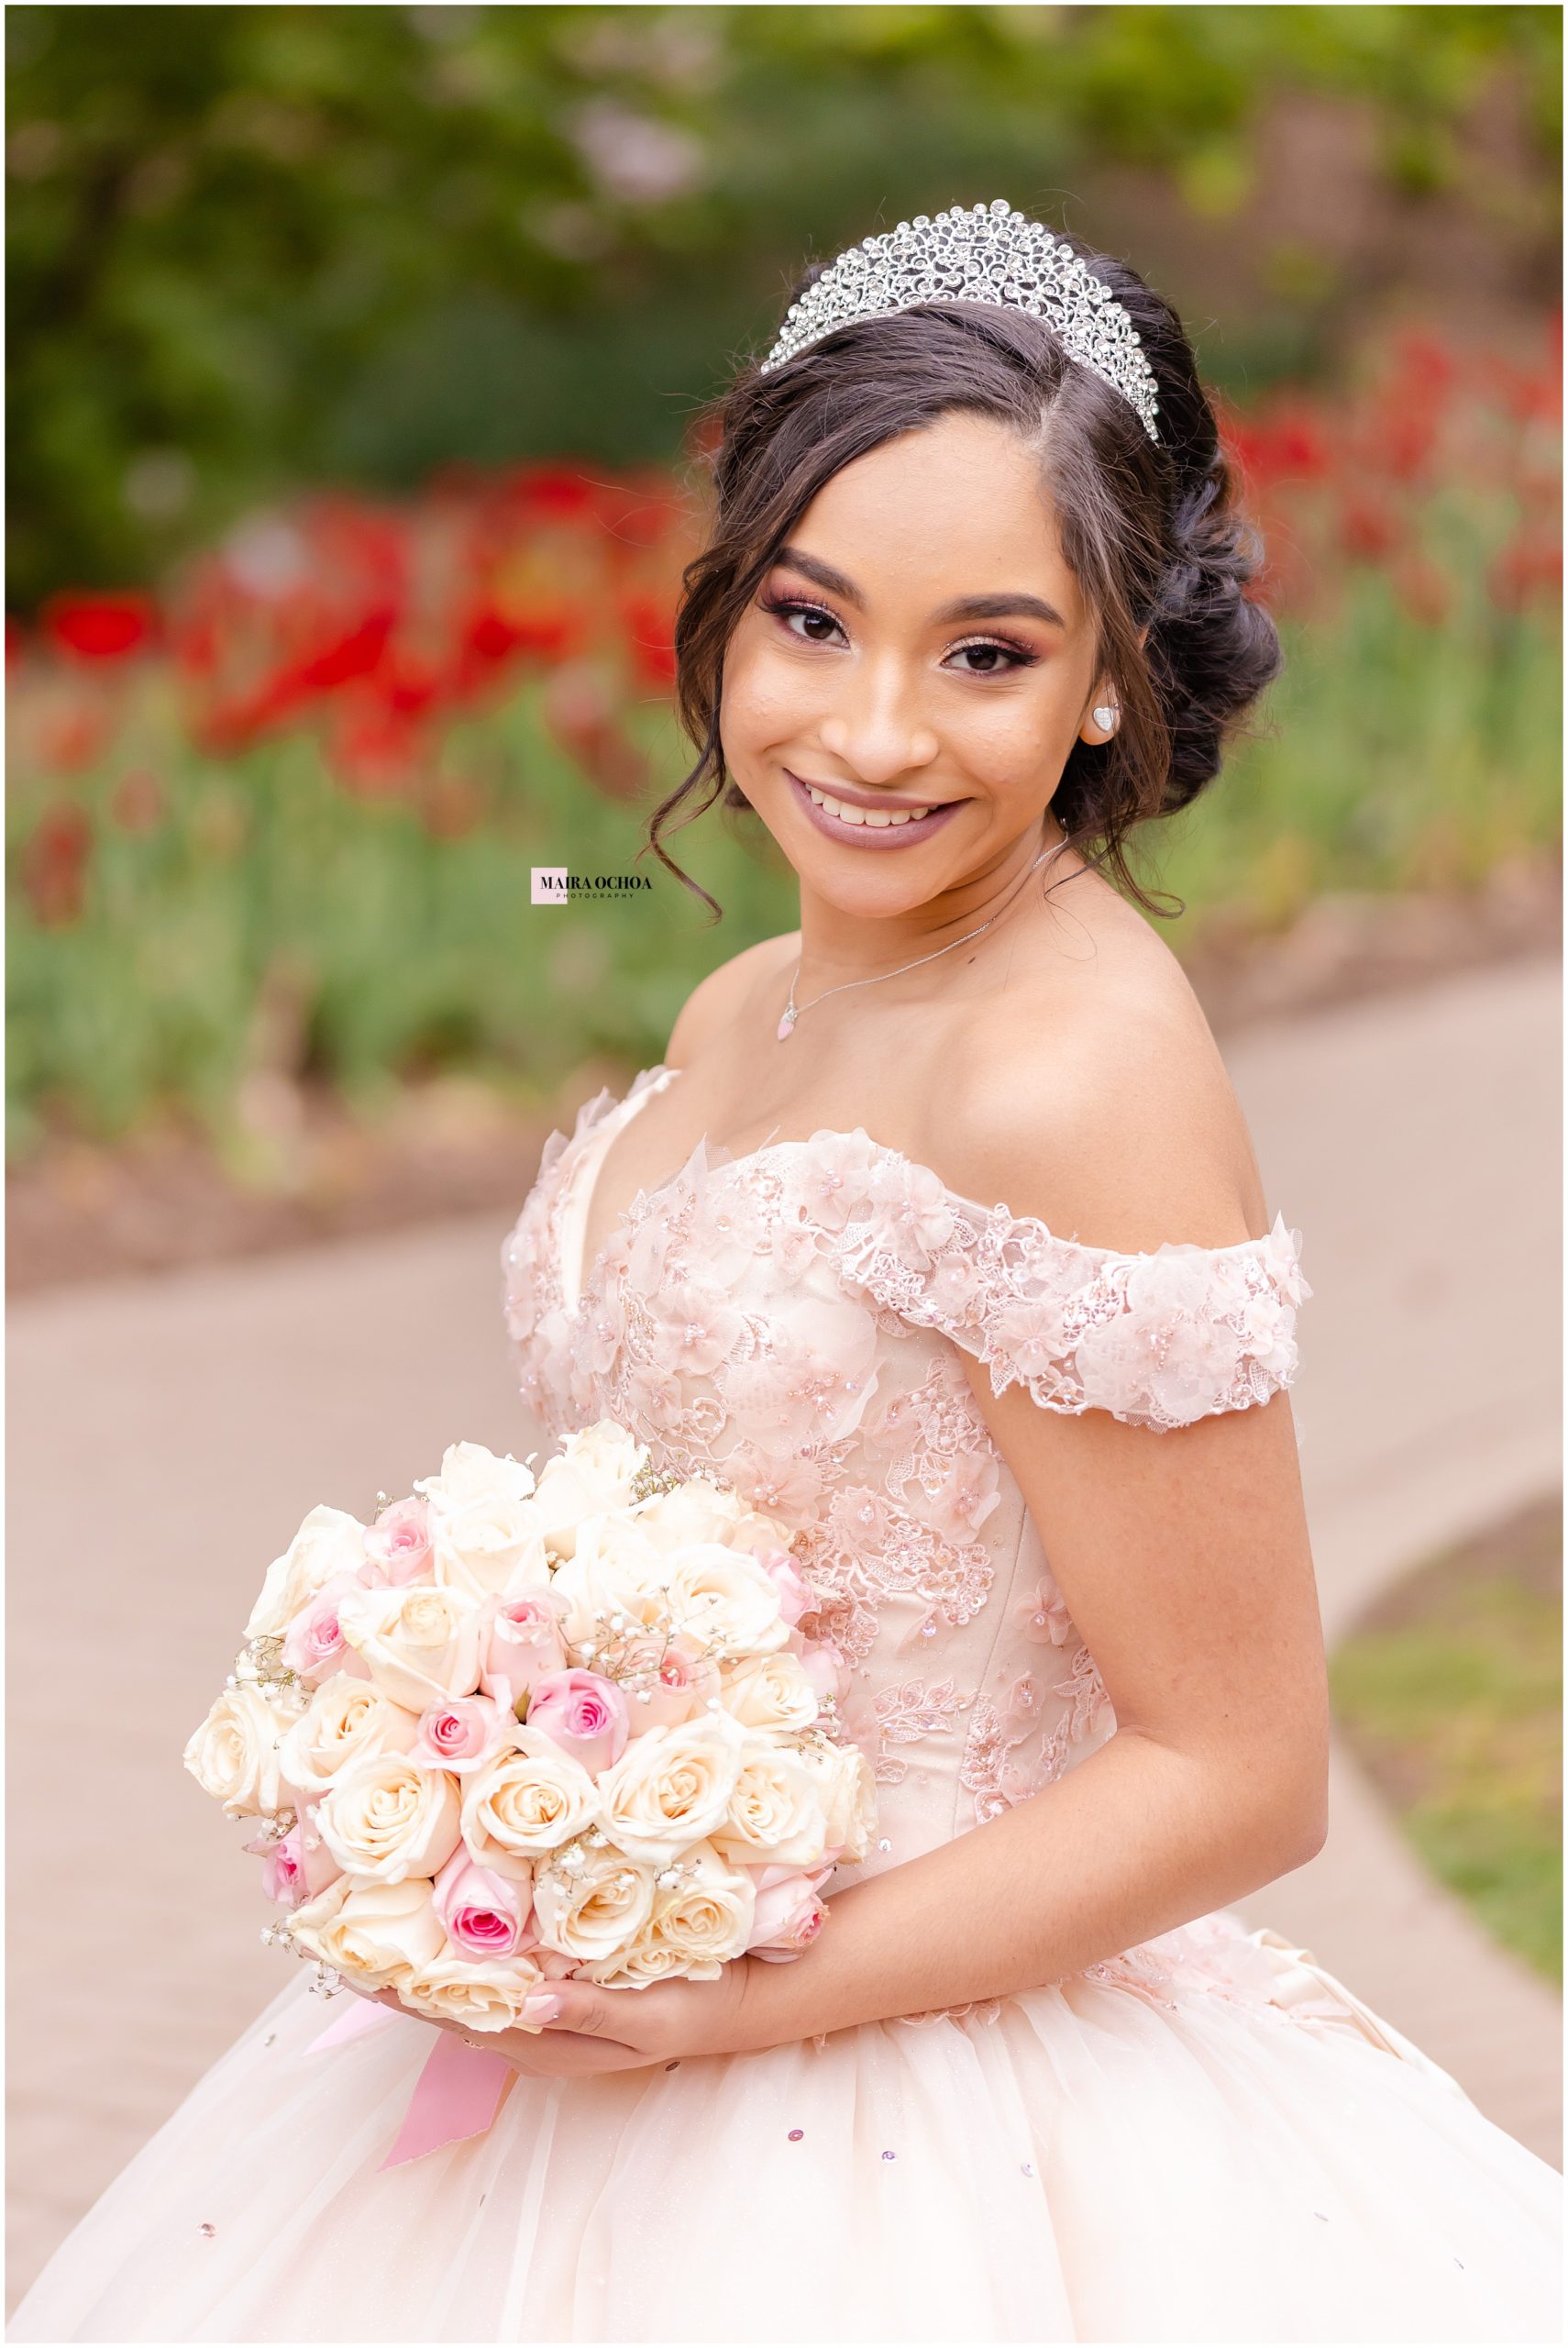 Pink Ball Gown Quinceañera outdoors spring flowers, red tulips, Lilacia Park Lombard, IL